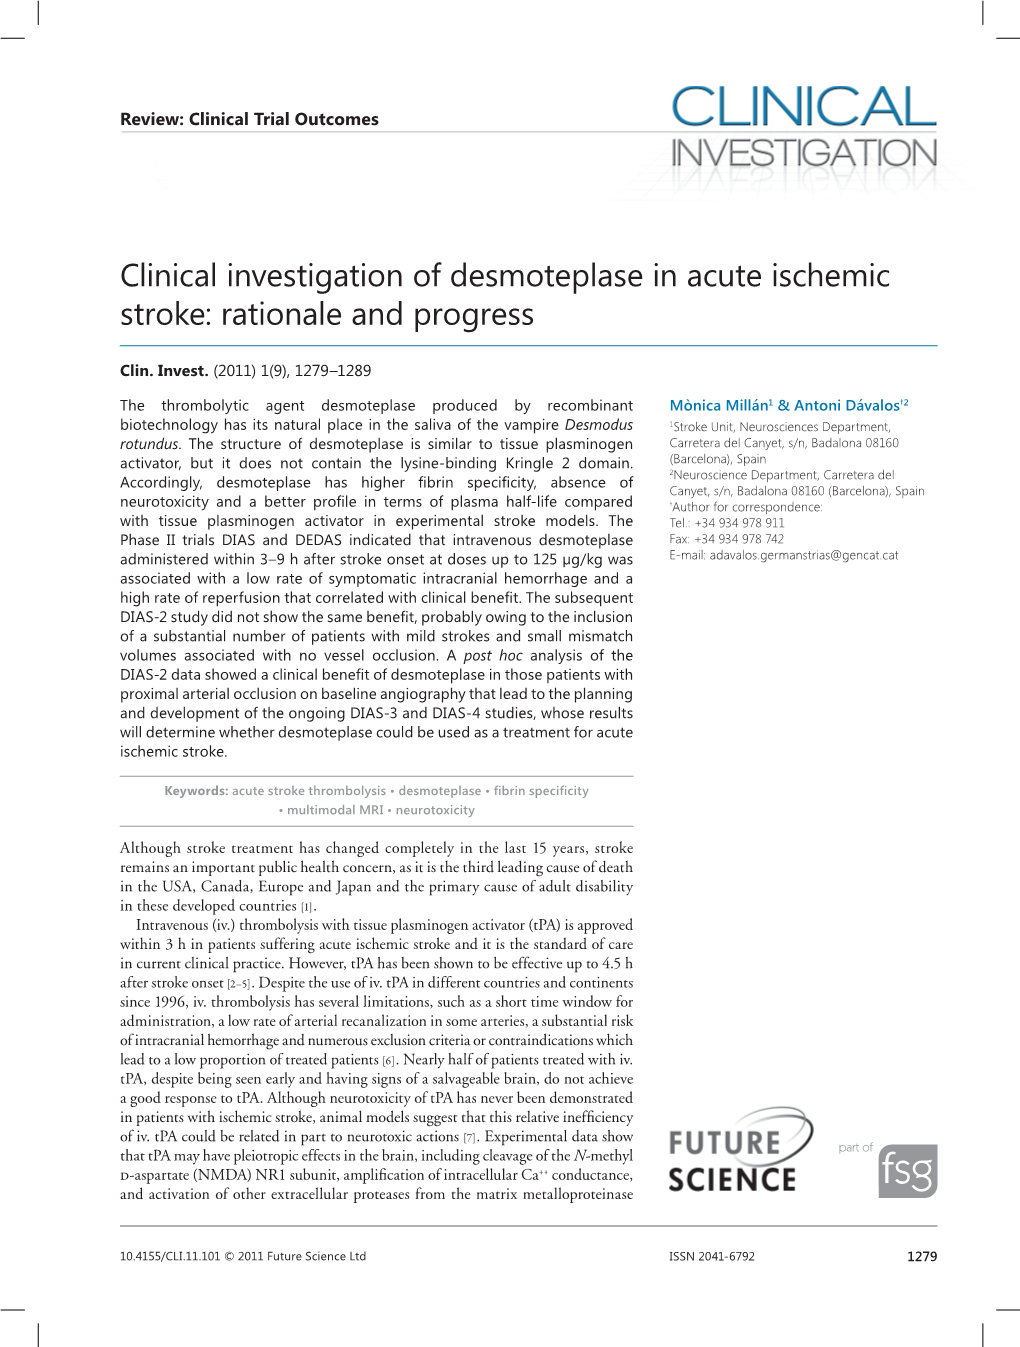 Clinical Investigation of Desmoteplase in Acute Ischemic Stroke: Rationale and Progress